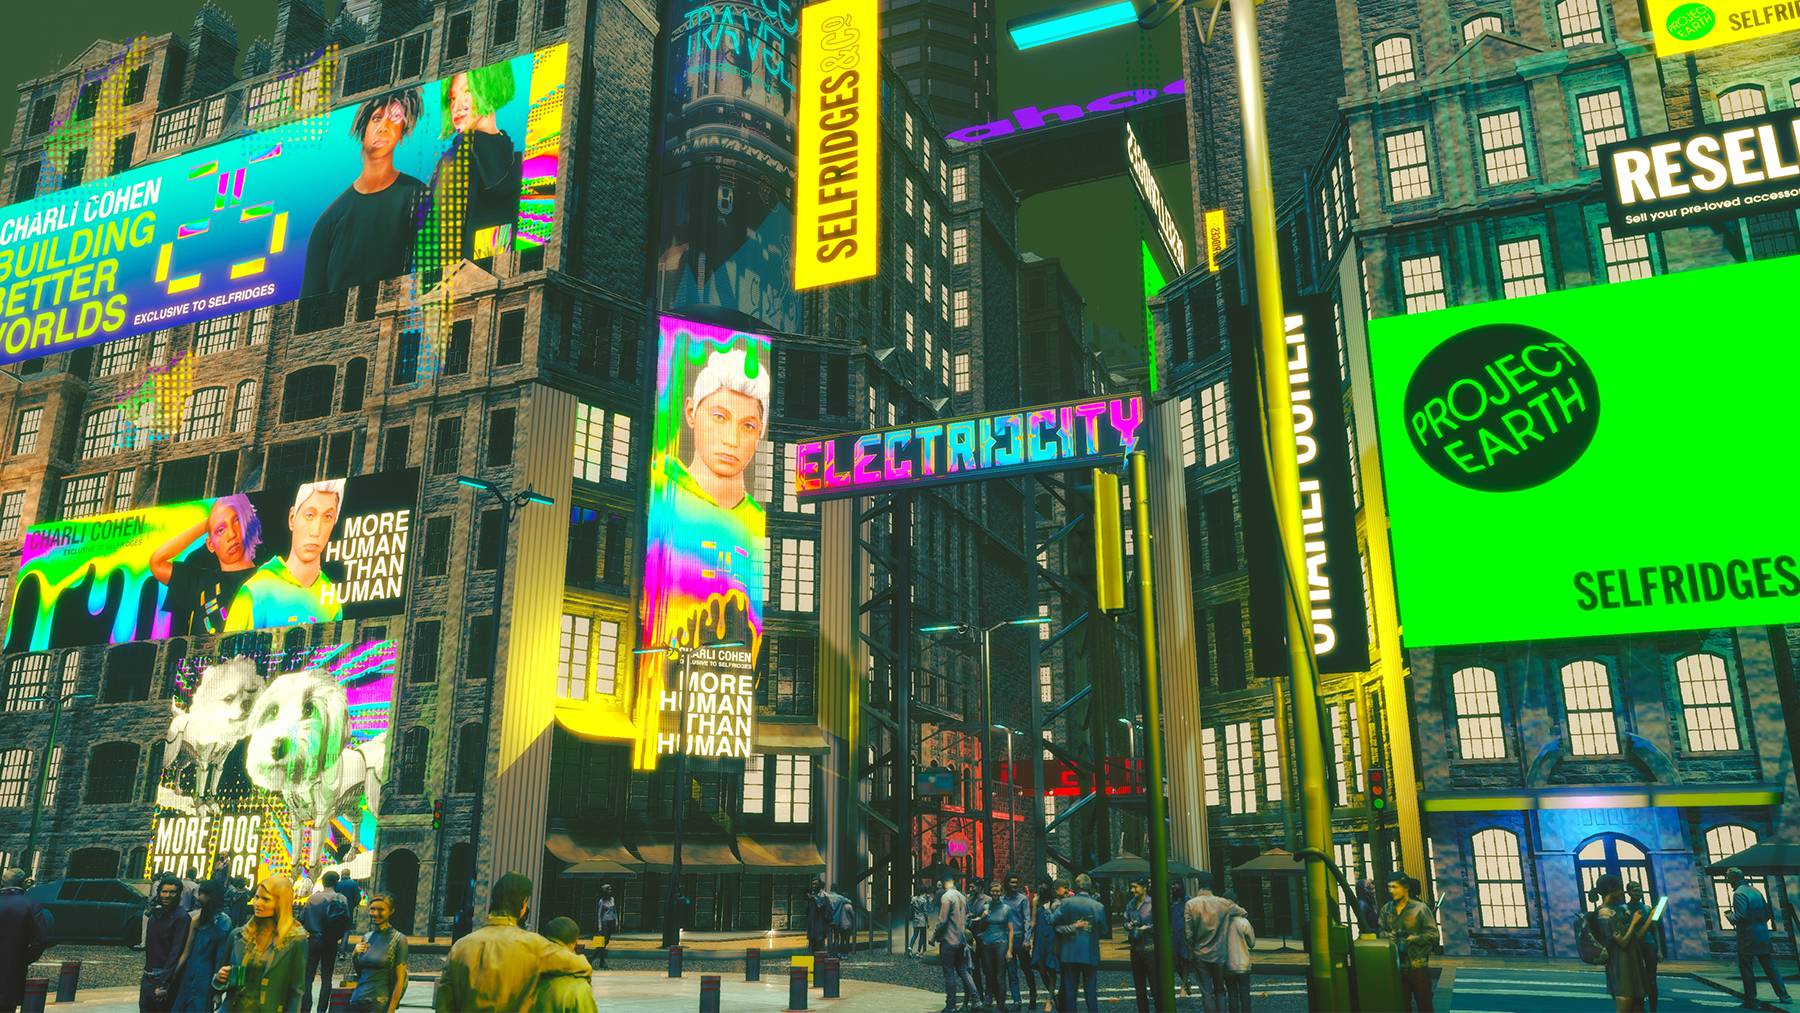 Electric/City, by Selfridges, Charli Cohen, and Yahoo Ryot Lab.